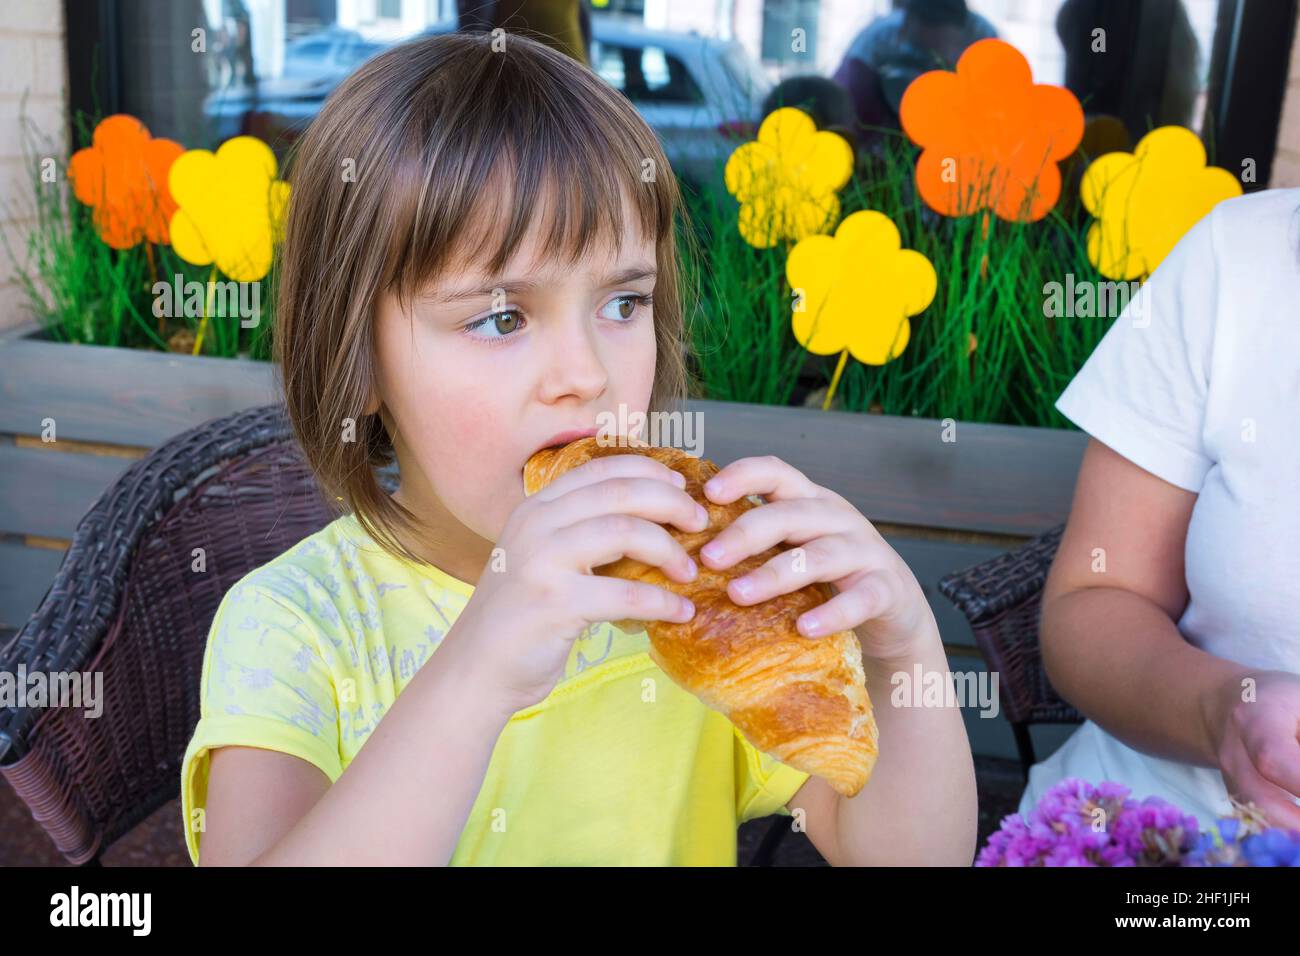 A girl in cafe eats a croissant. Stock Photo